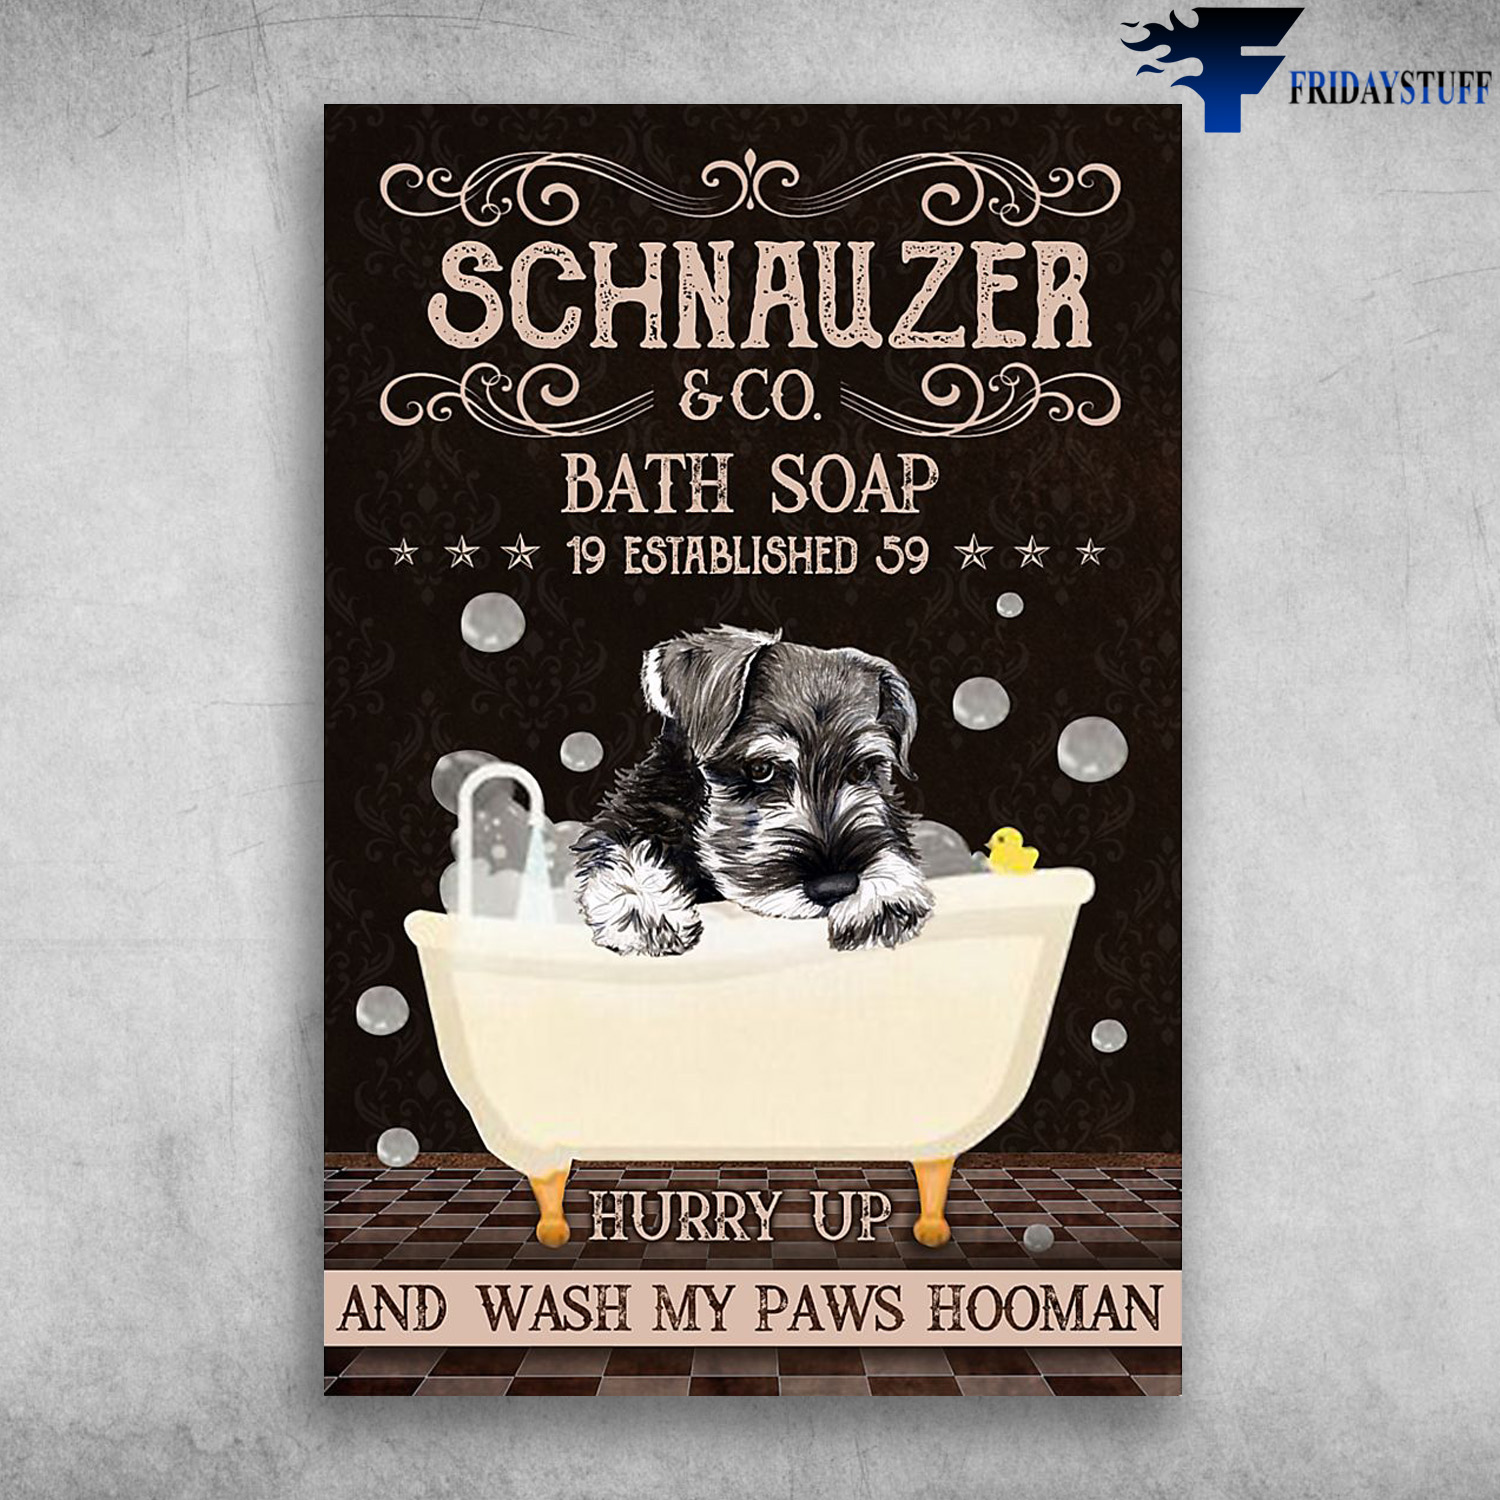 Schnauzer And Co. - Bath Soap, 19 Established 59, Hurry Up And Wash My Paws Hooman